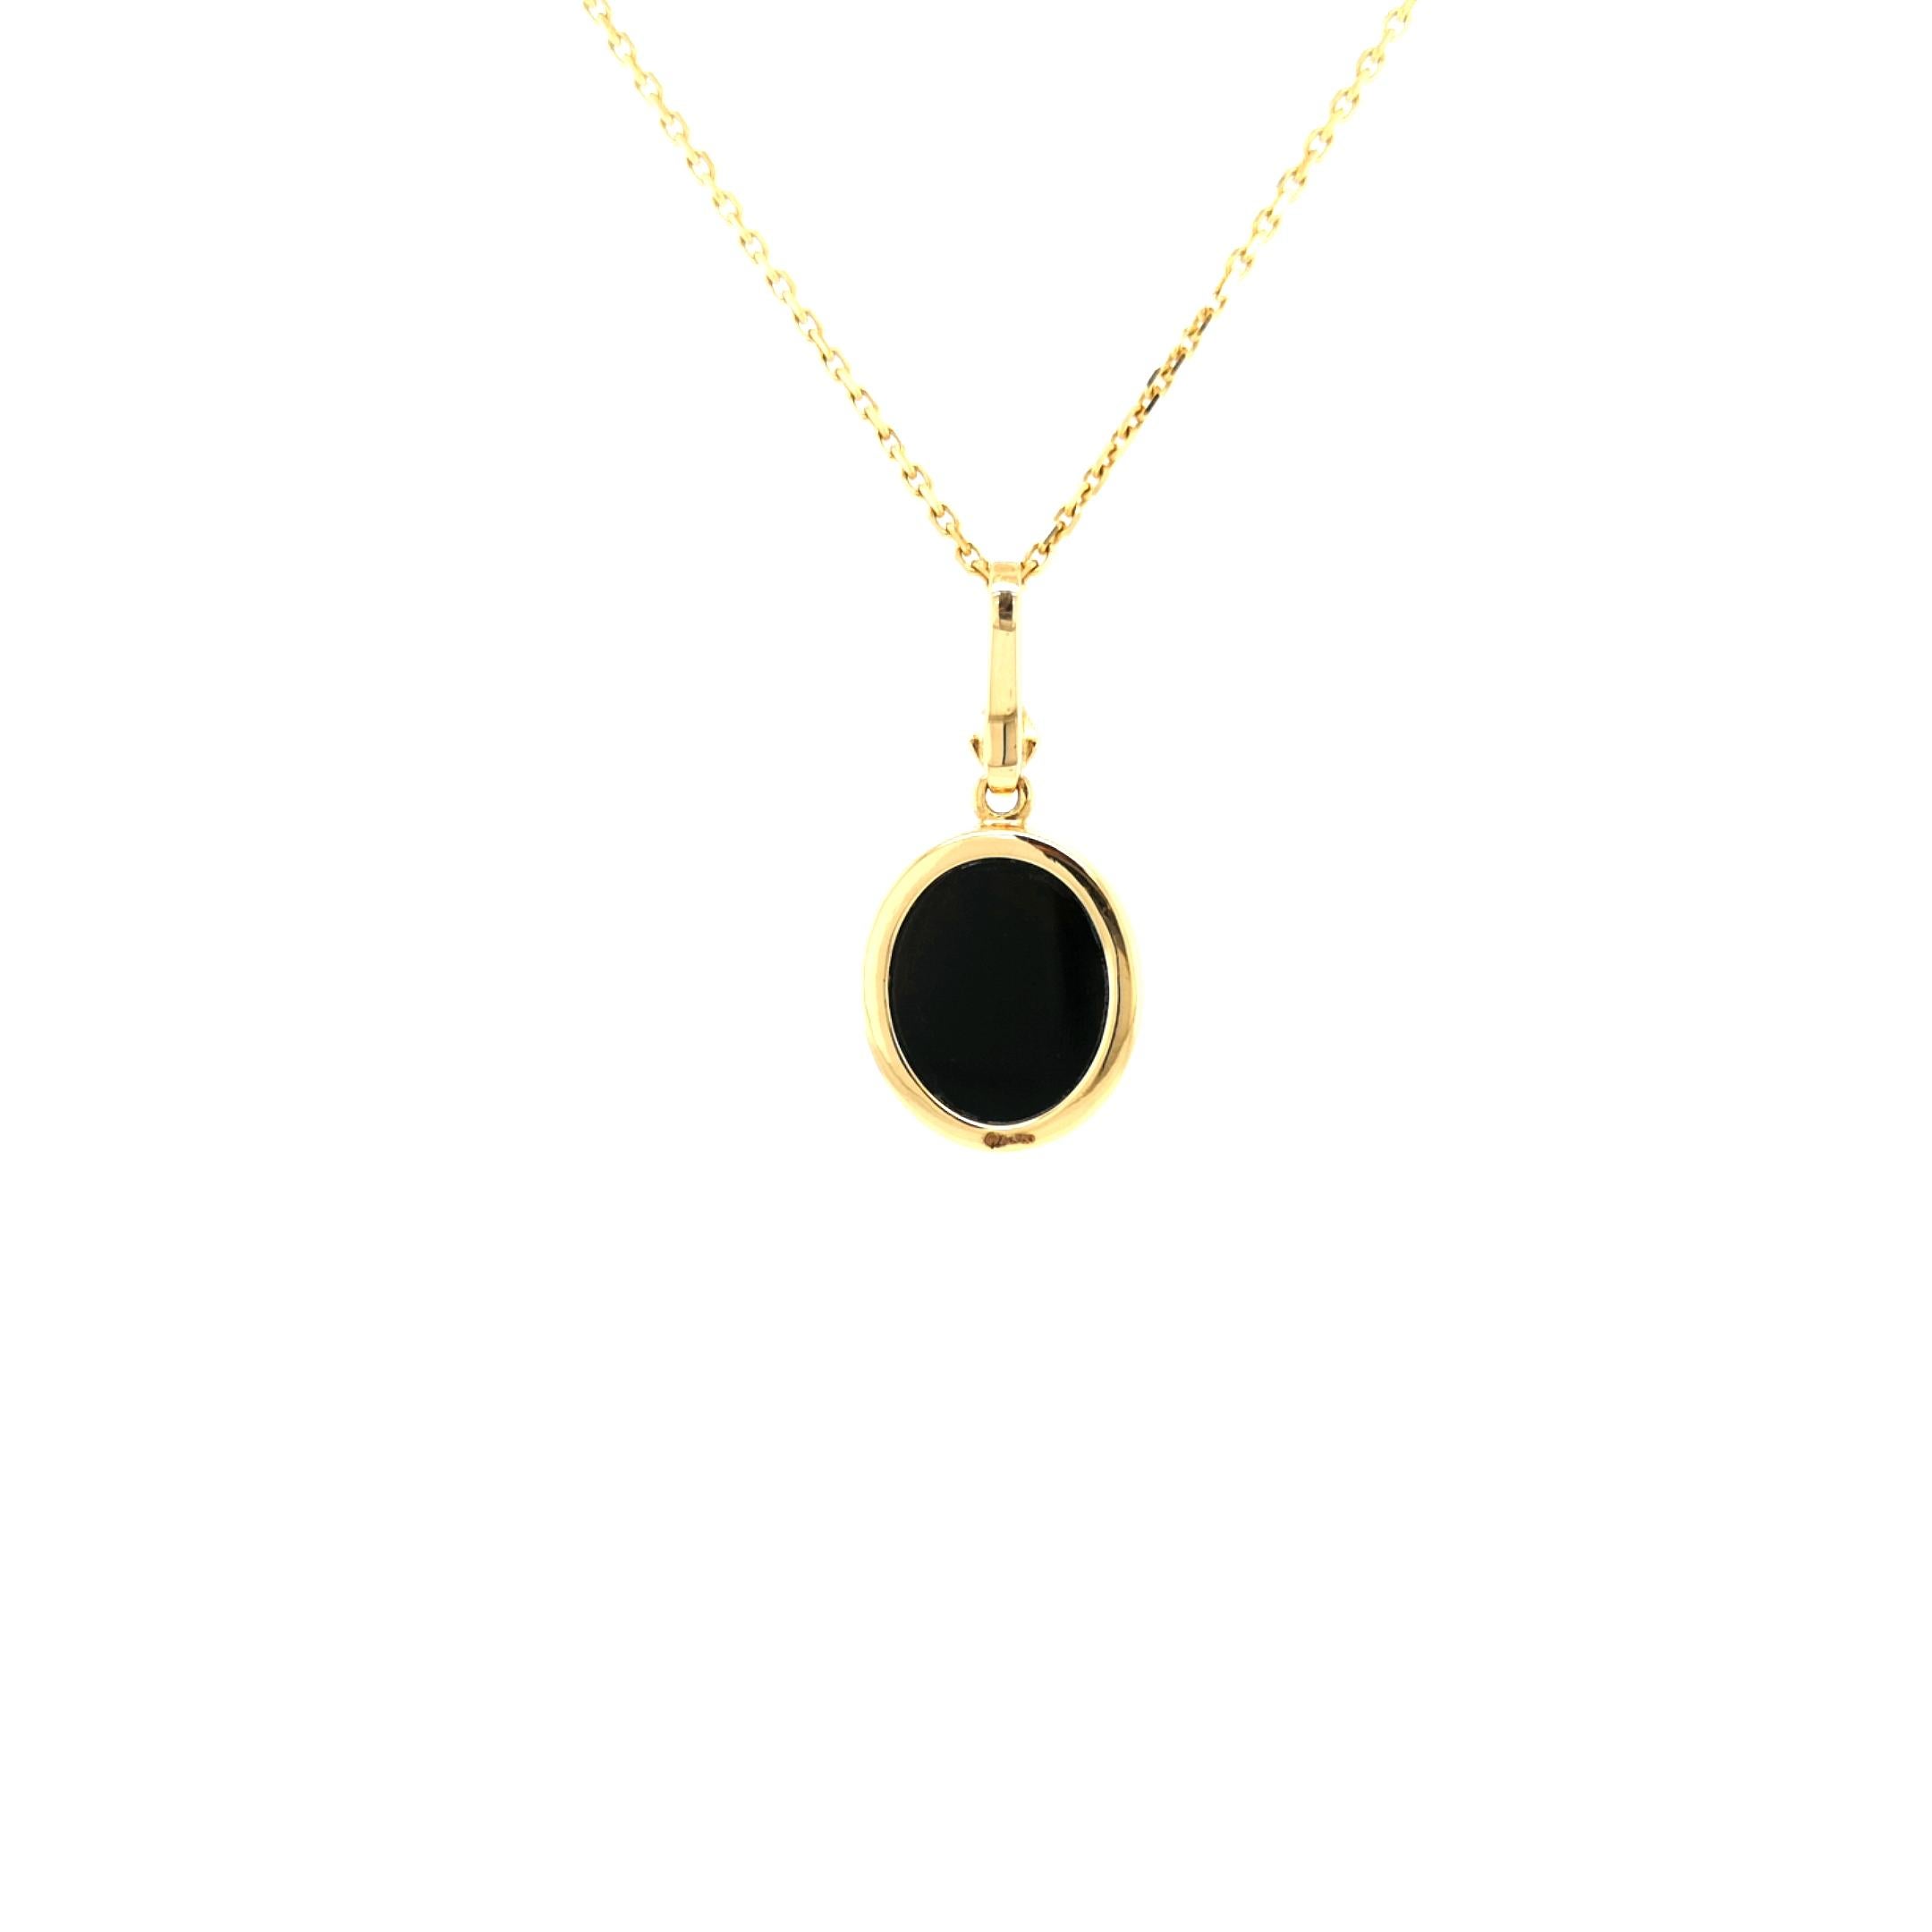 Women's or Men's Oval Pendant - 18k Yellow Gold - 1 Diamond 0.02 ct GV S Blue Layered Onyx For Sale